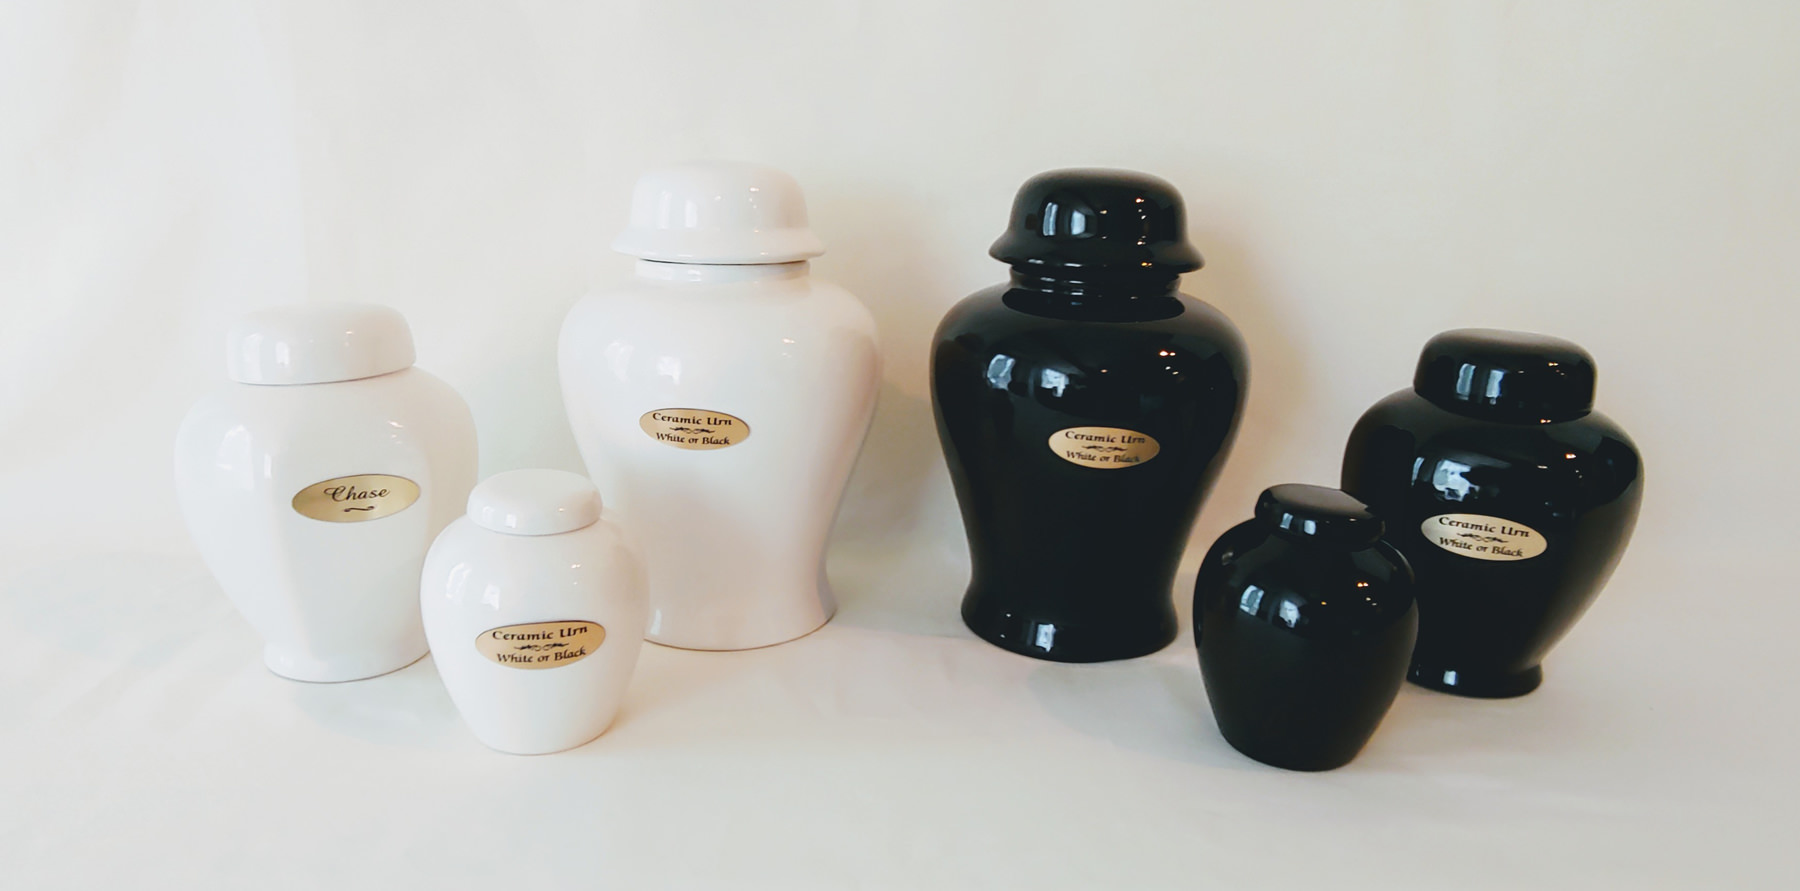  CERAMIC URNS Available in White and Black